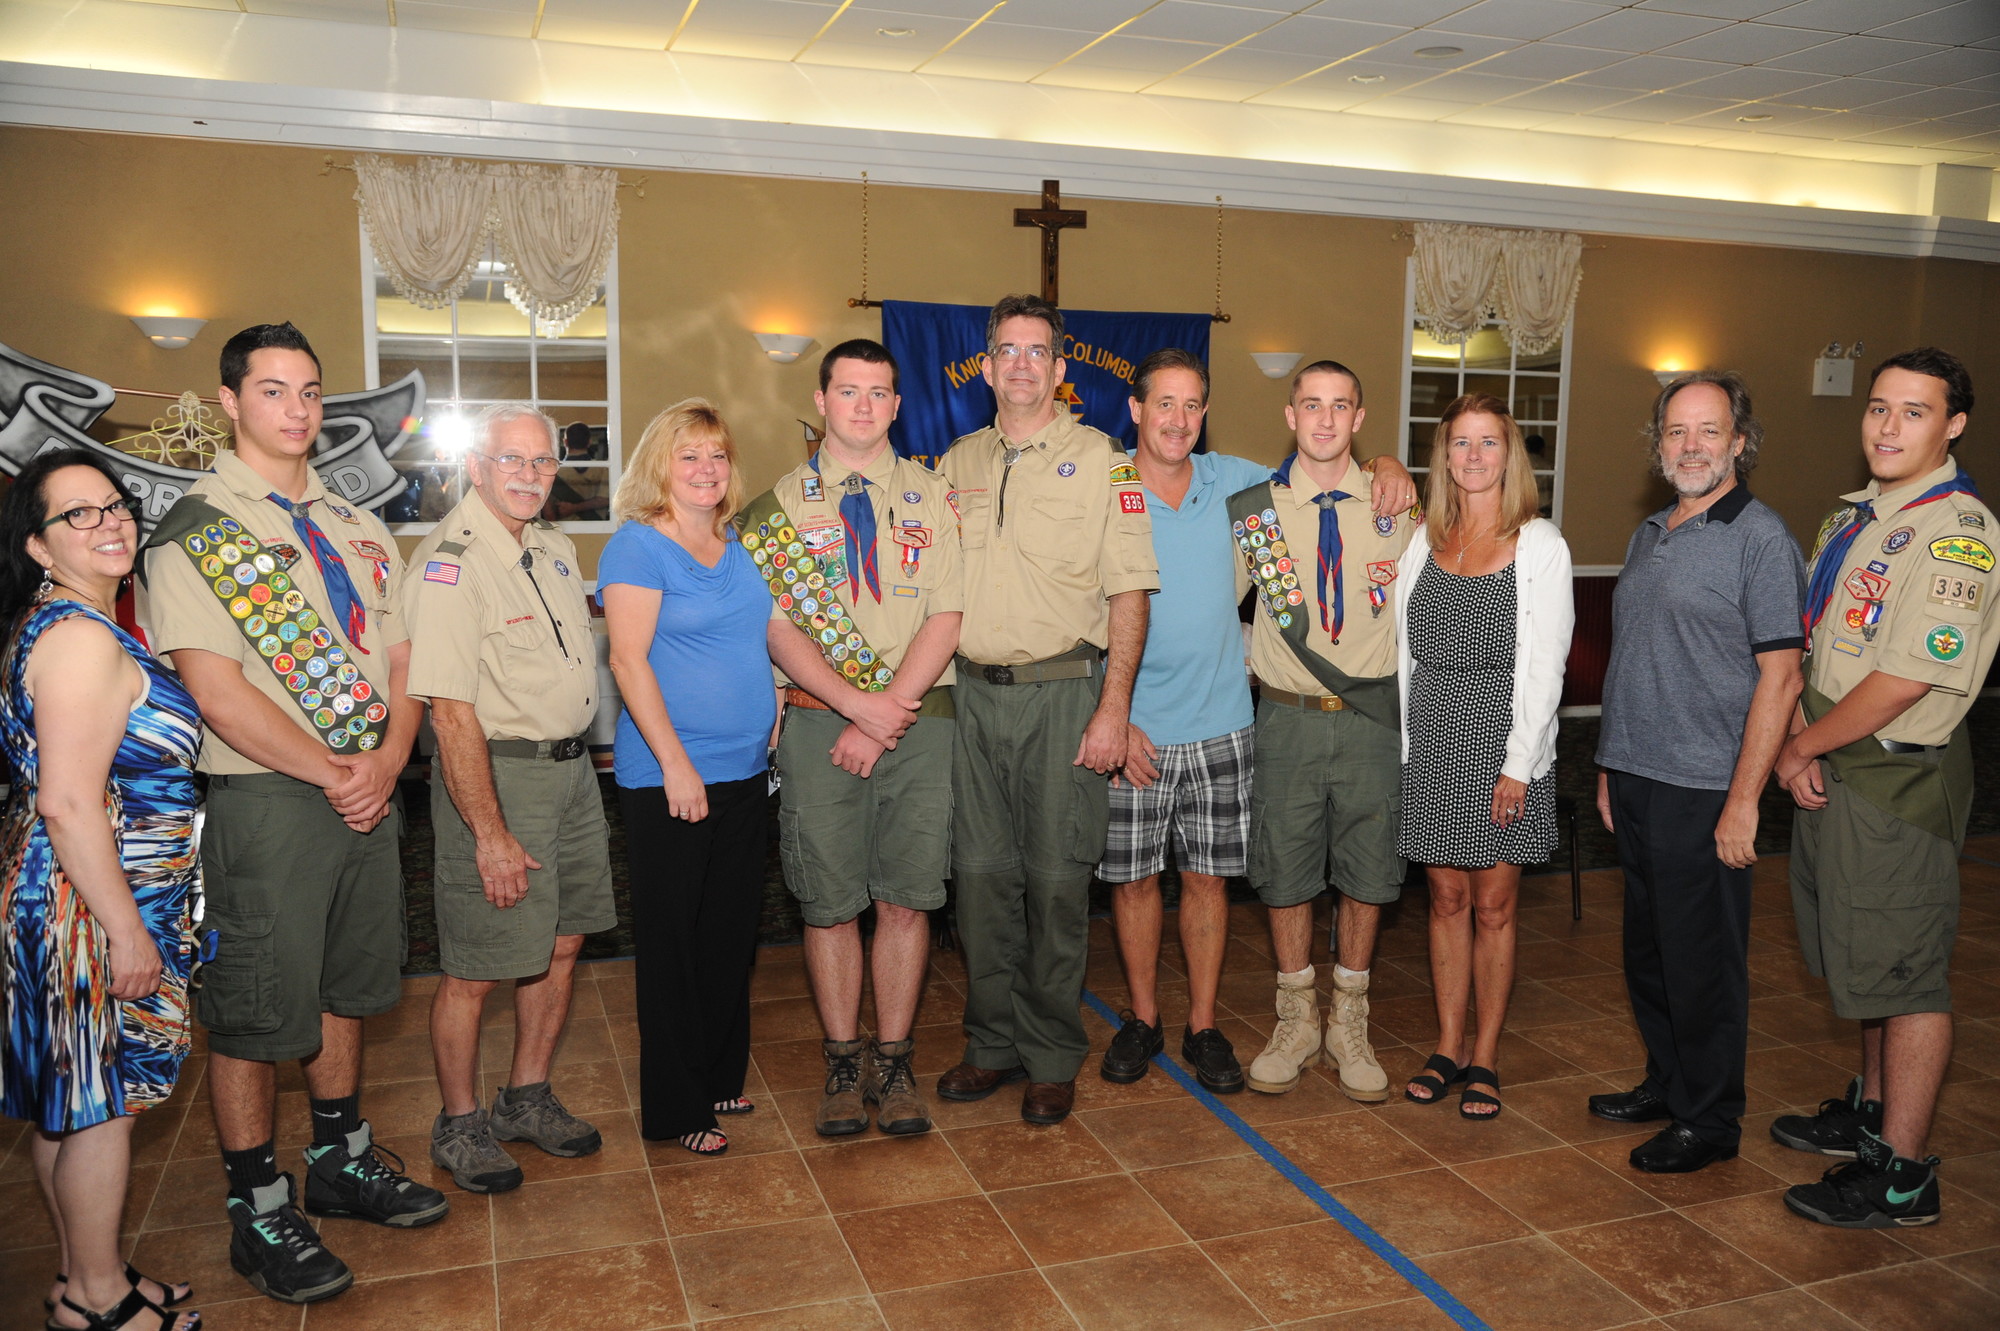 Family members congratulated the Eagle Scouts after the ceremony at the Lynbrook Knights of Columbus